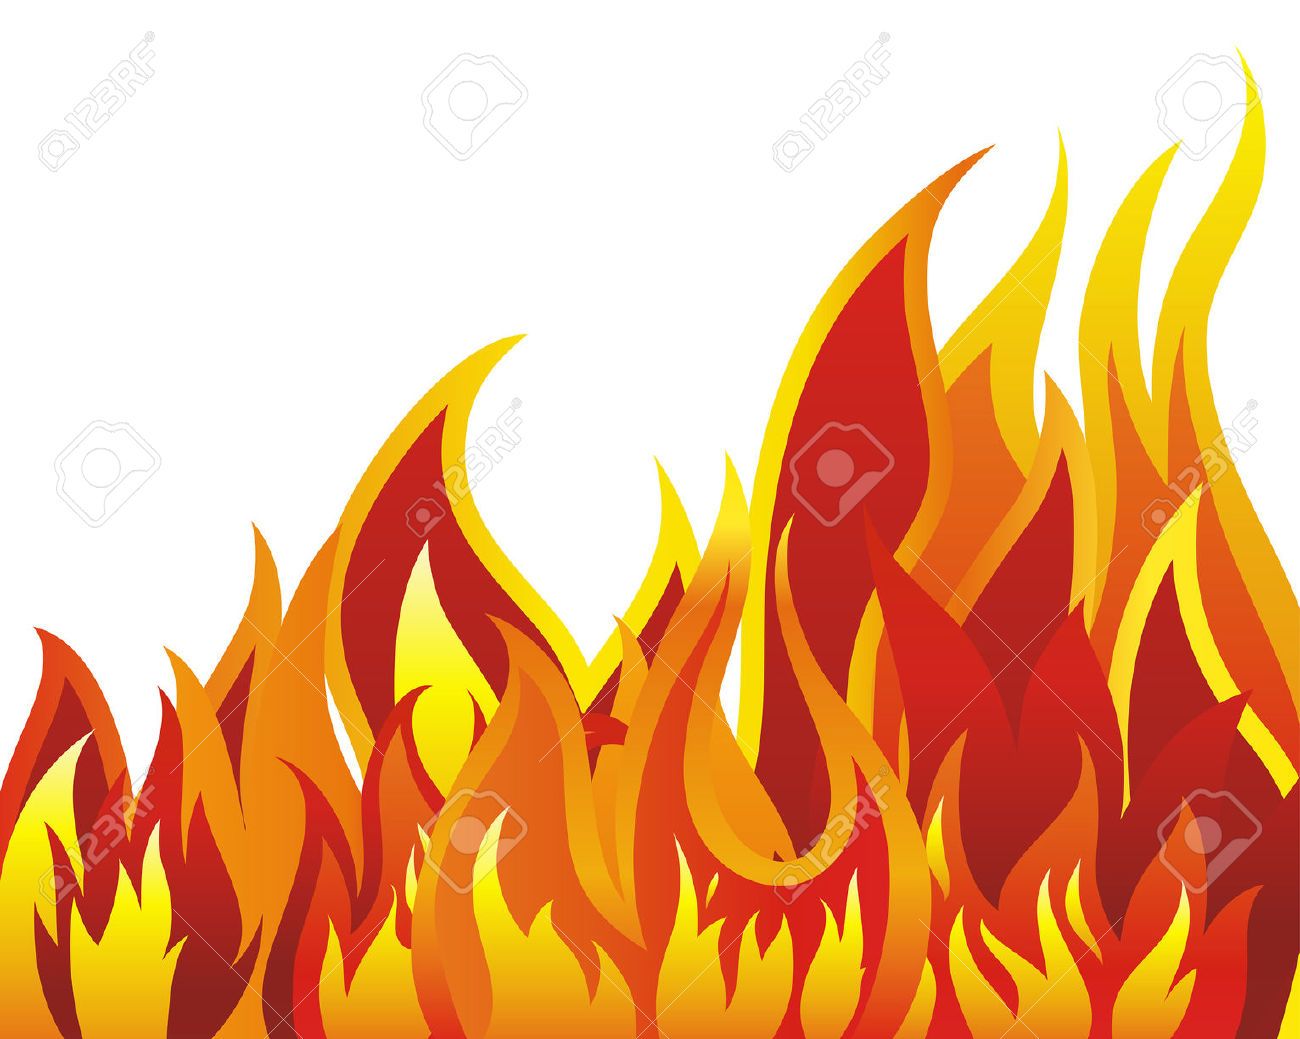 Flames clipart vector art. Stock fireplace quilts in